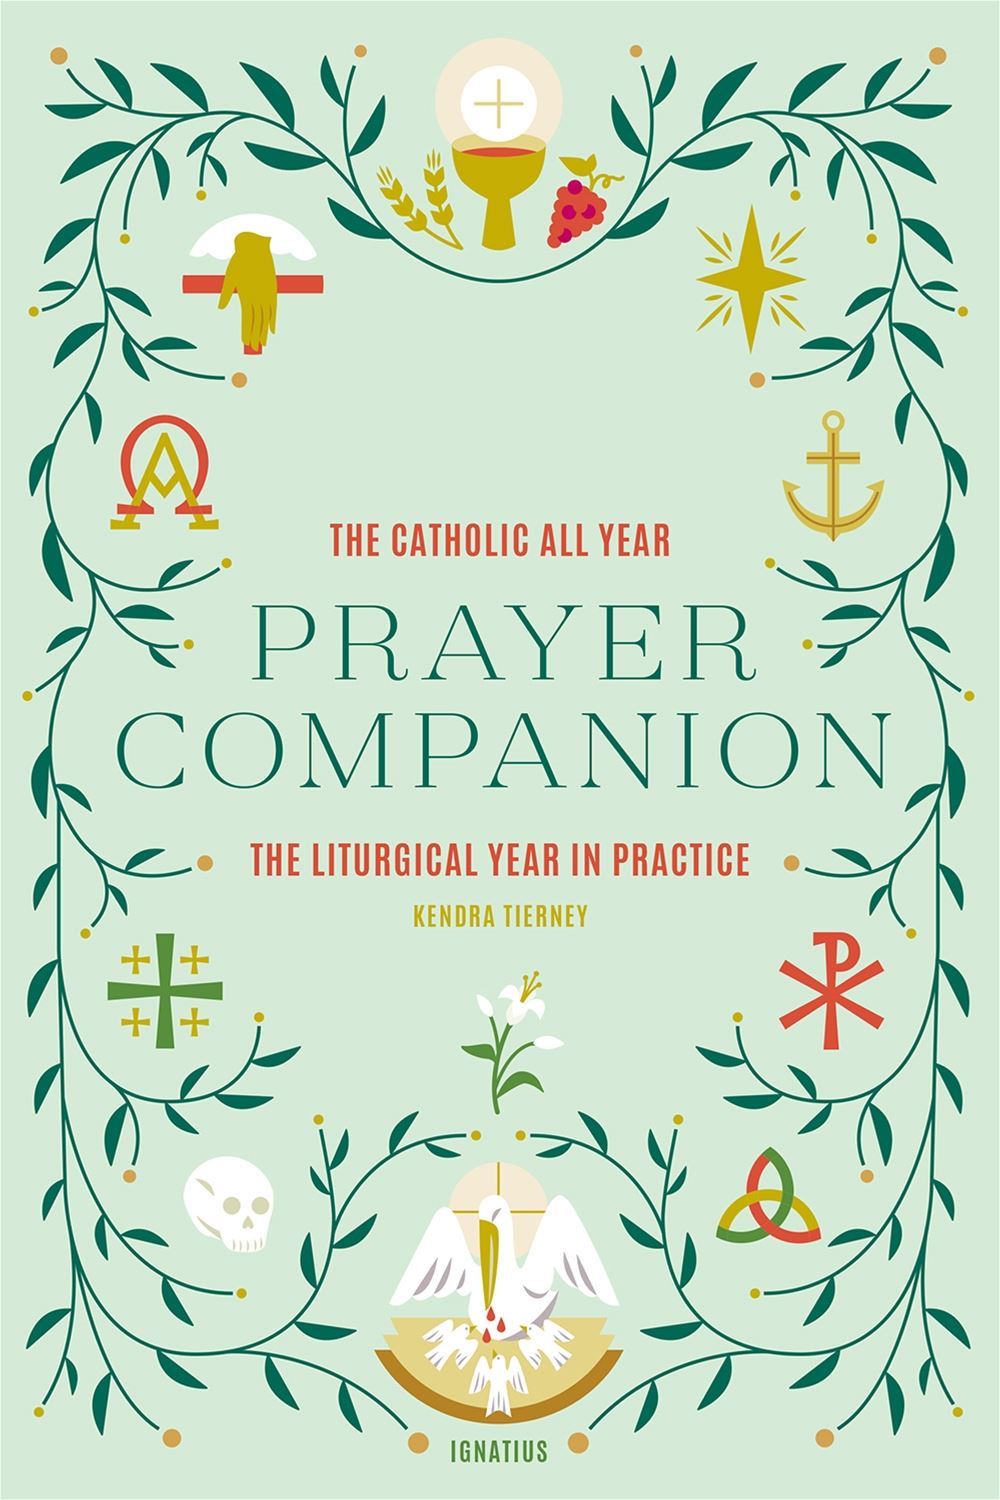 The Catholic All Year Prayer Companion The Liturgical Year in Practice By: Kendra Tierney